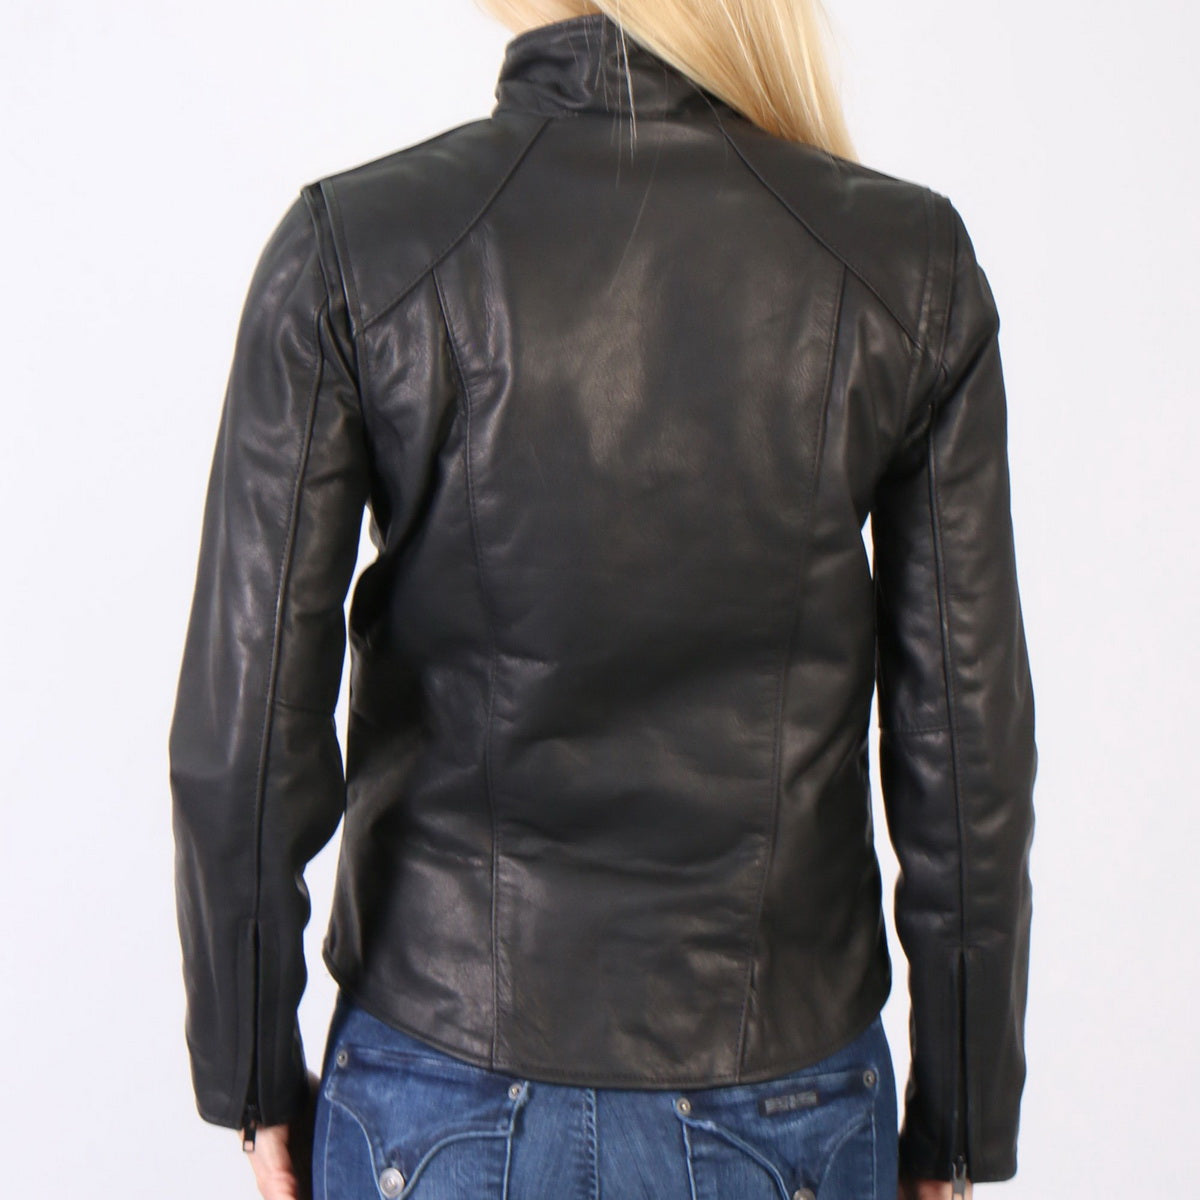 Hot Leathers JKL5003 USA Made Women's Black Clean Cut Leather Jacket